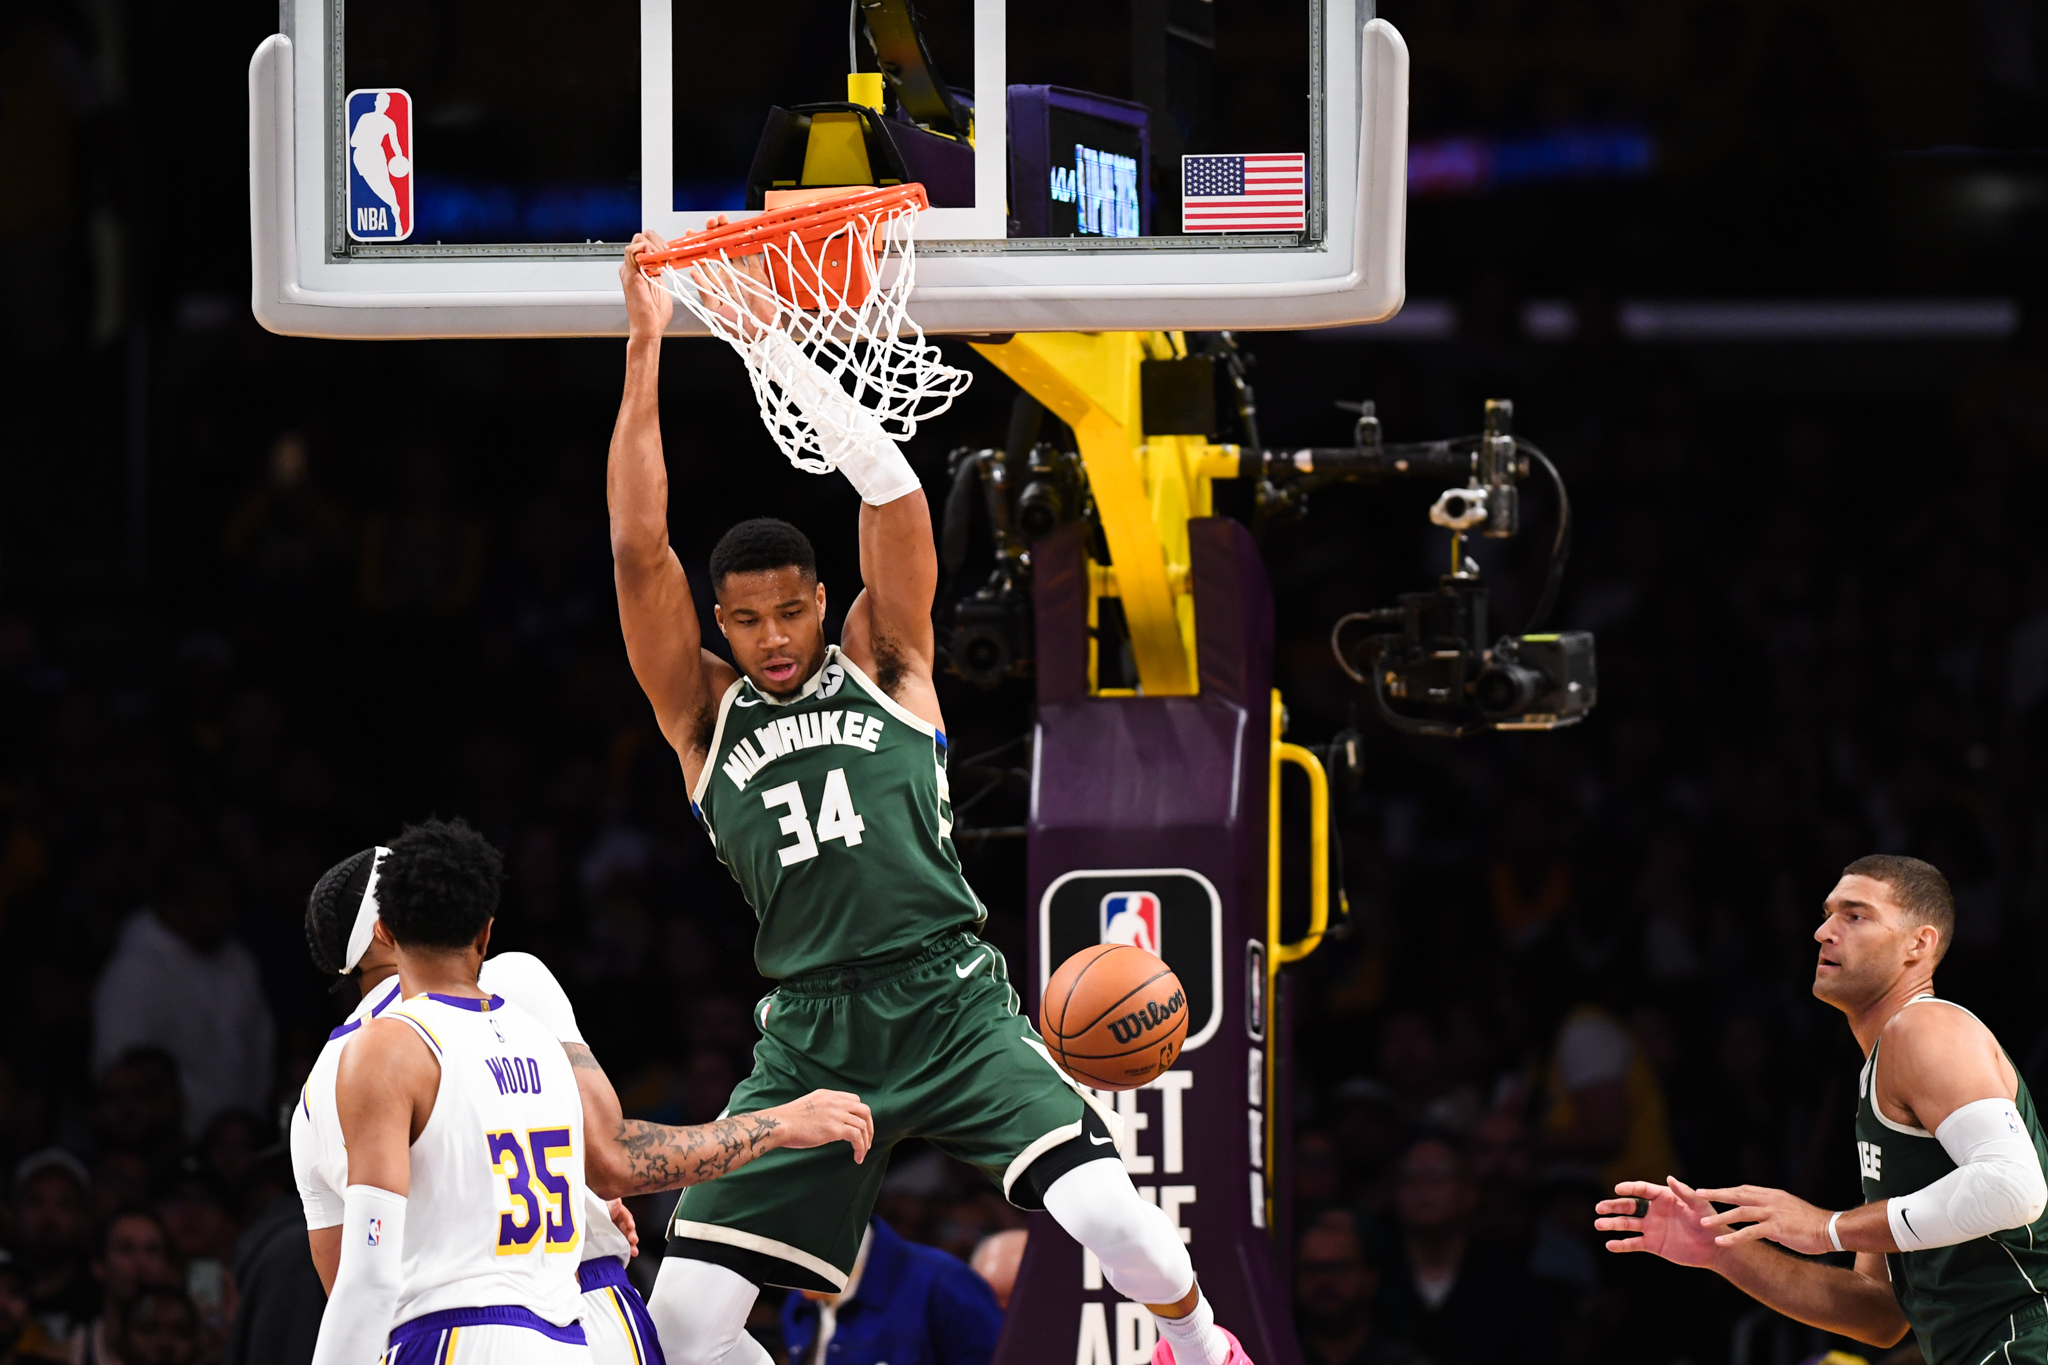 Giannis dunking